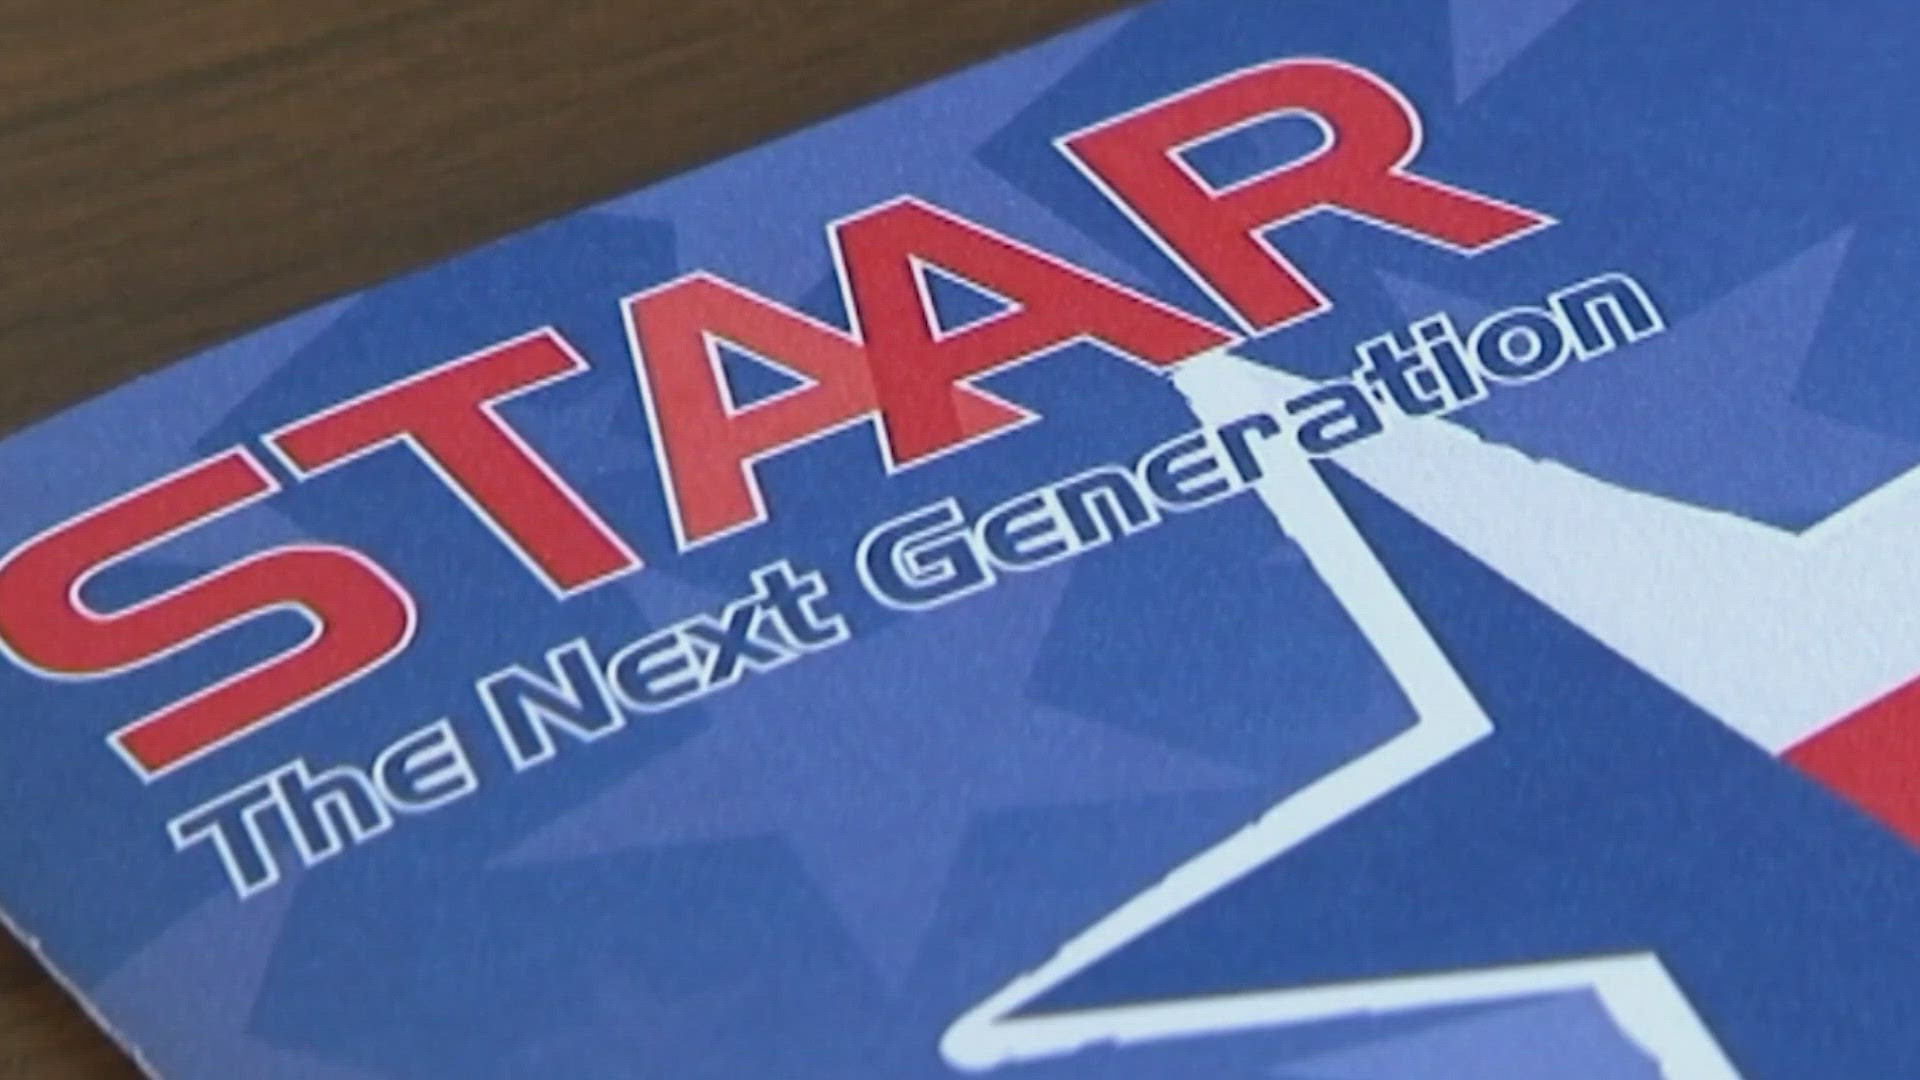 Dallas ISD STAAR test results revealed